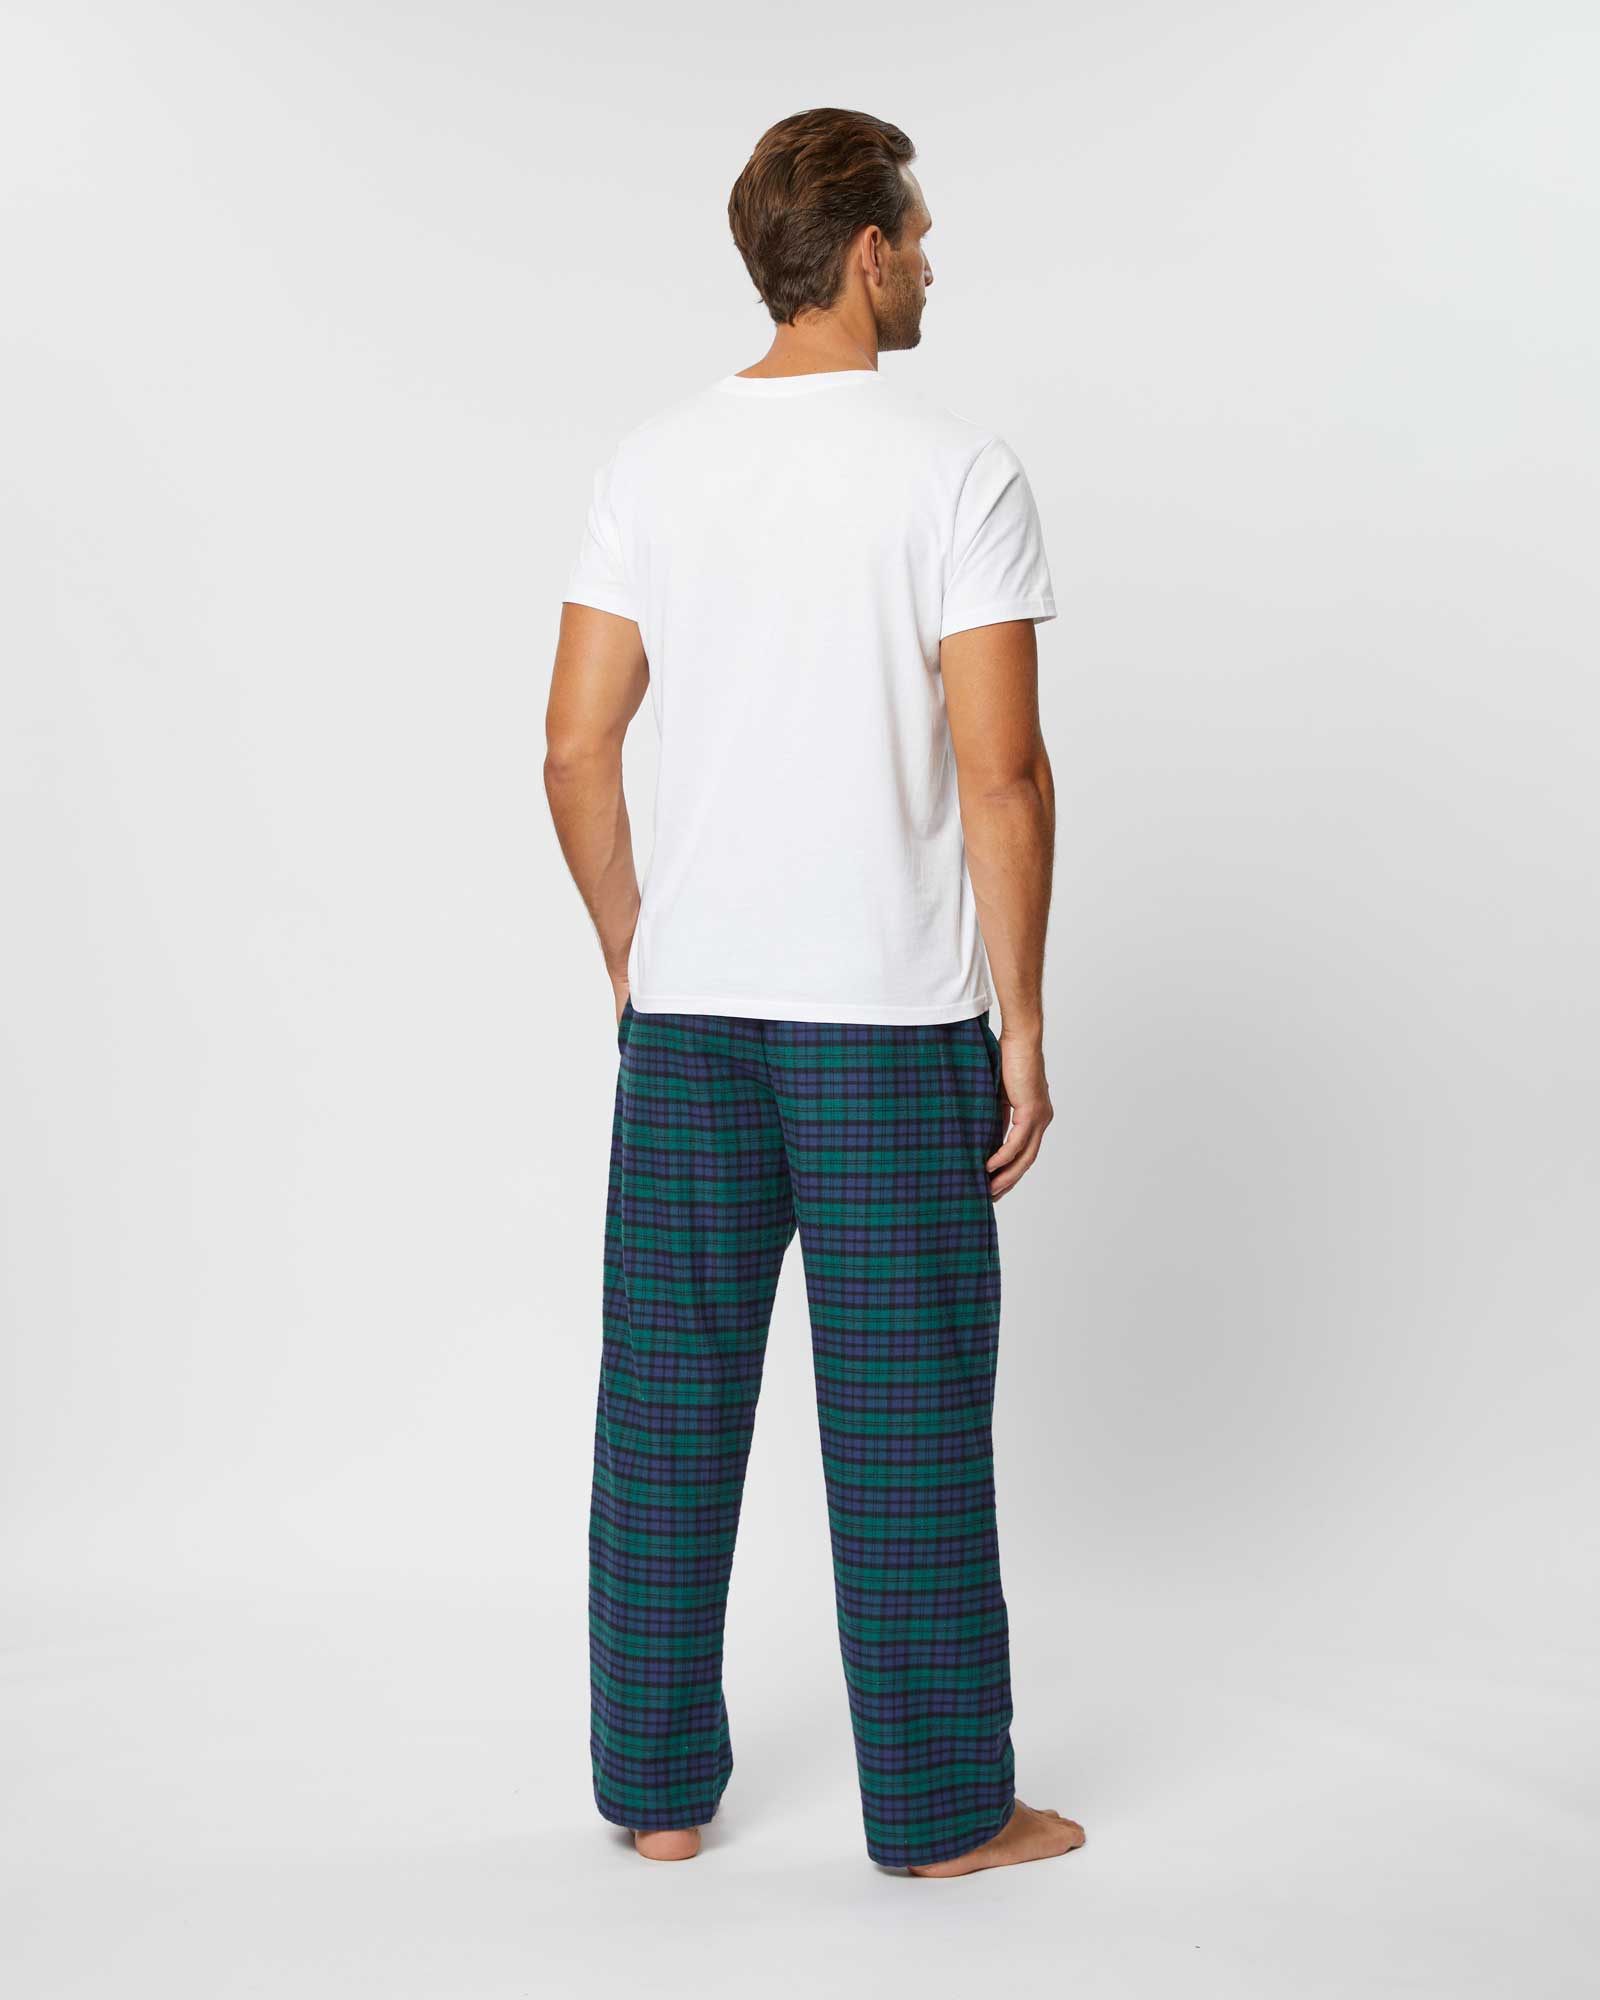 Free People Plaid About Pajama Pant – Green Eyed Daisy